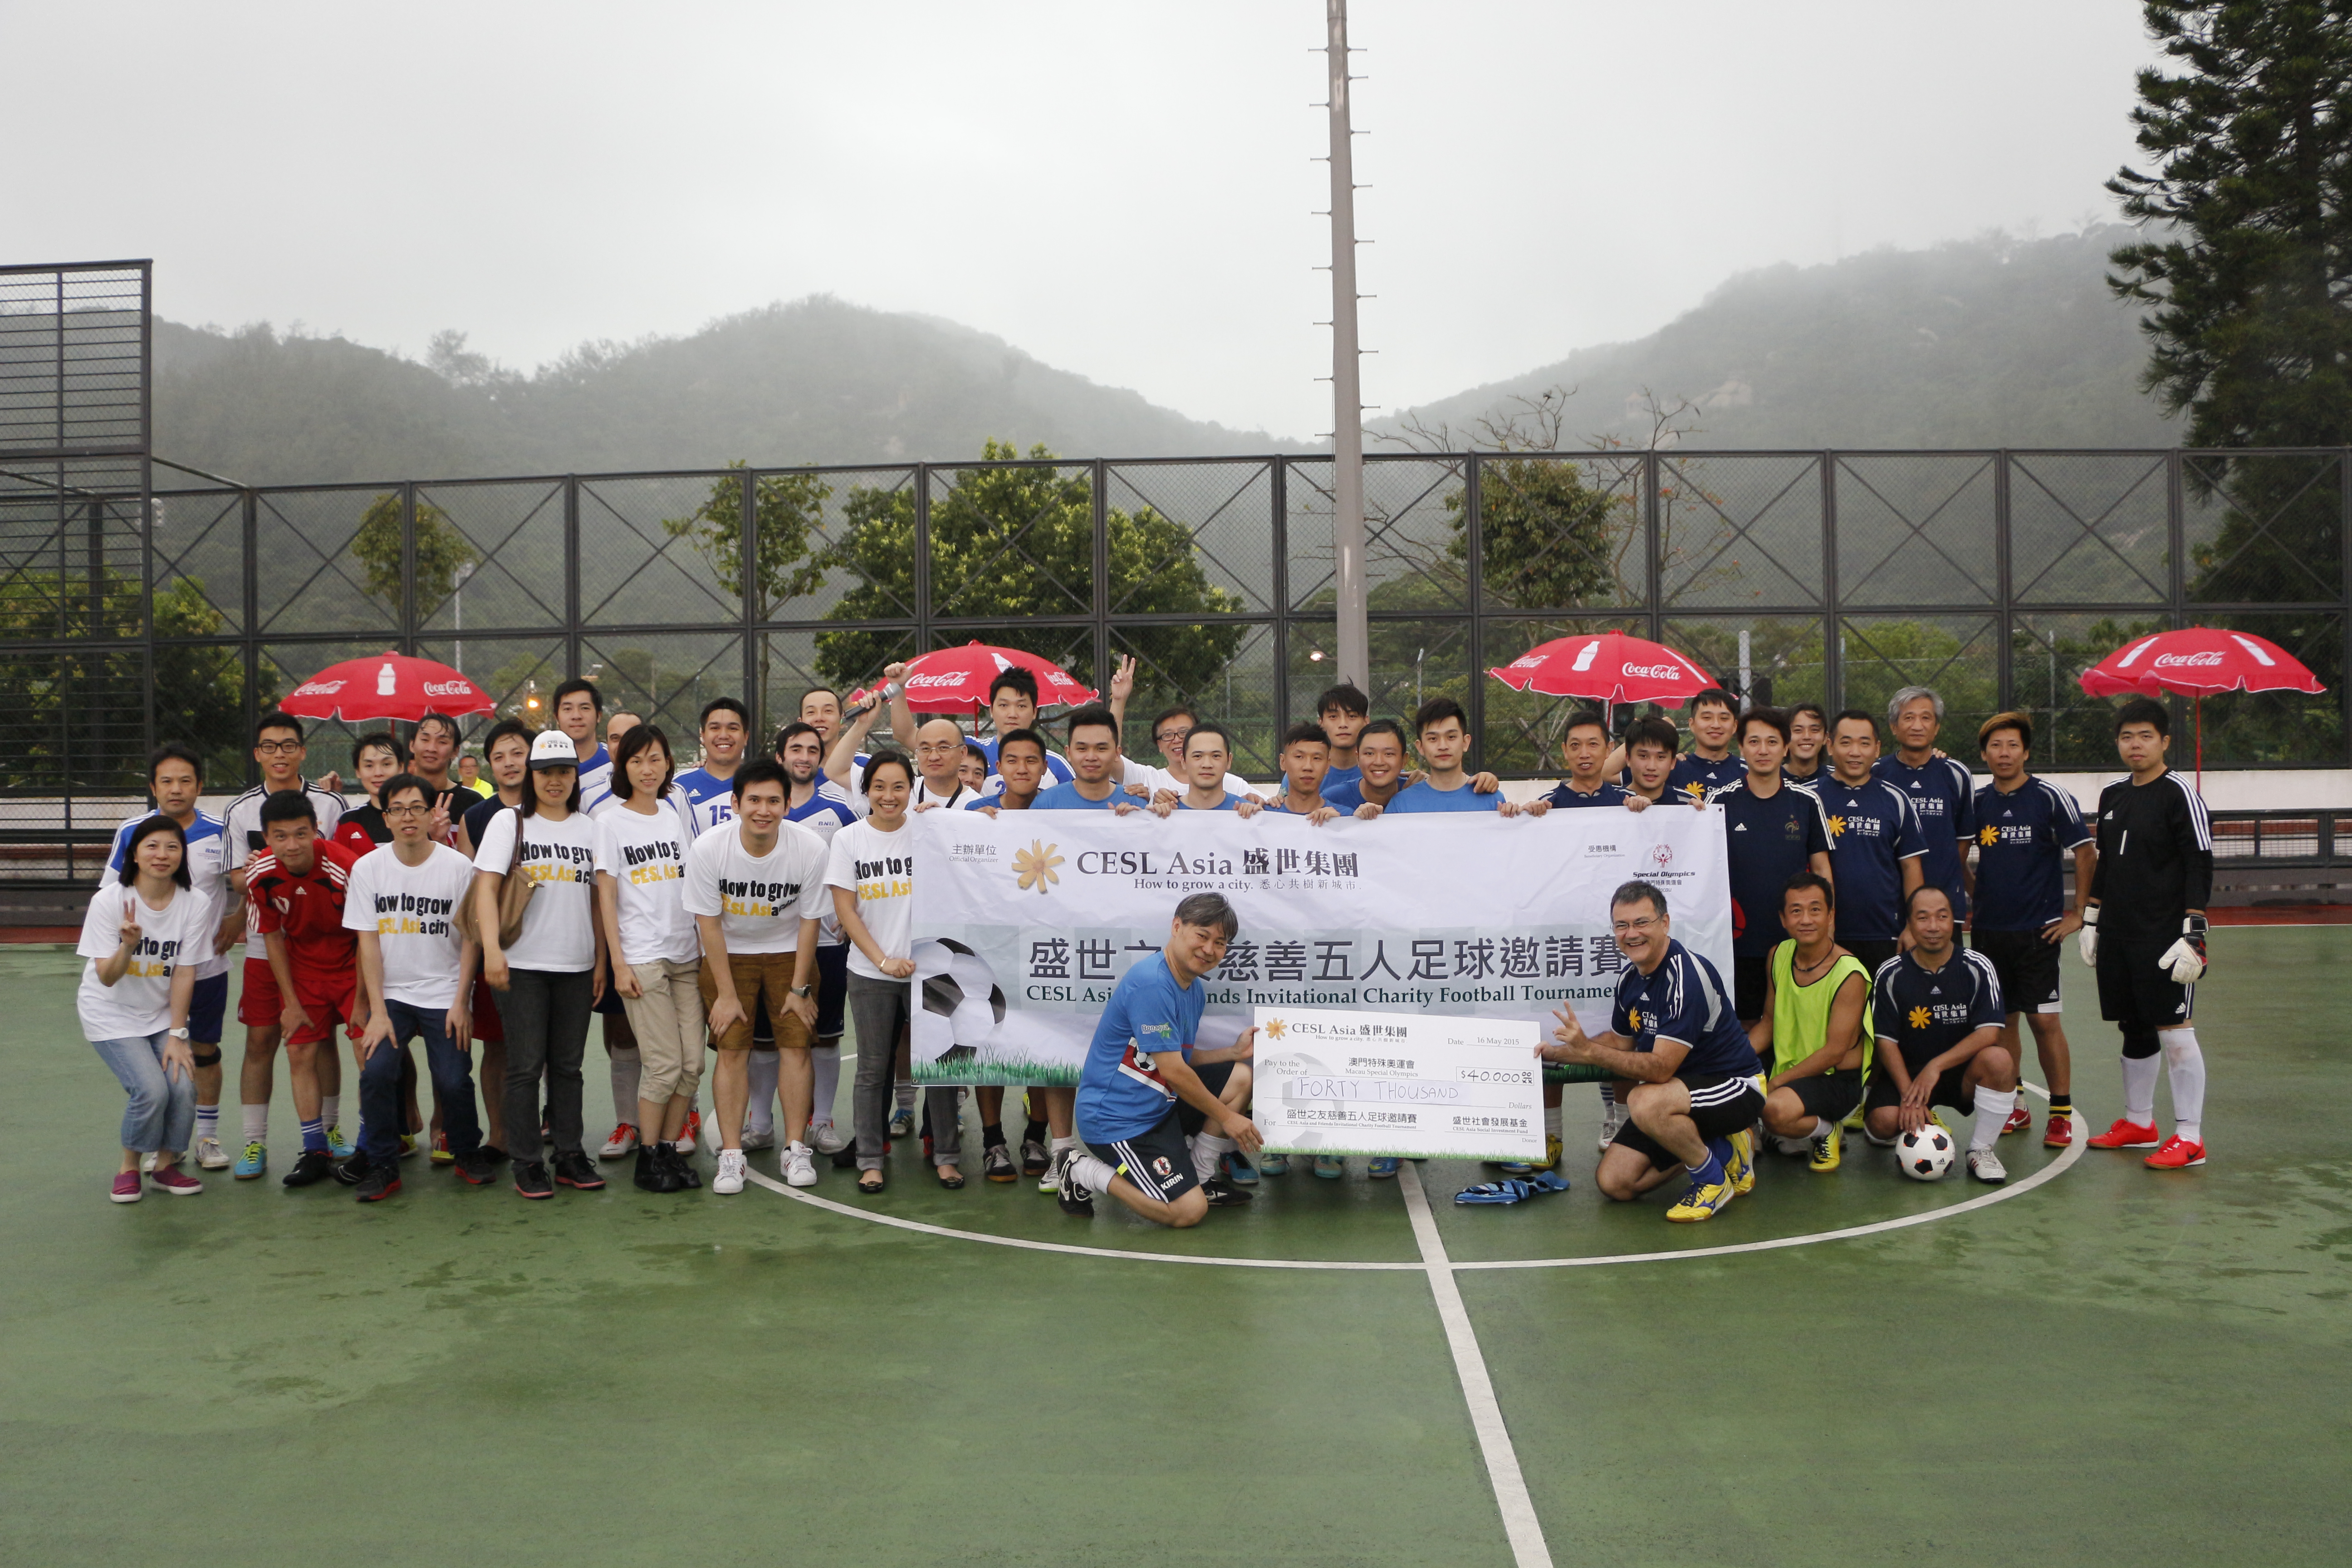 CESL Asia and Friends Invitational Charity Football Tournament (2015/05/16)